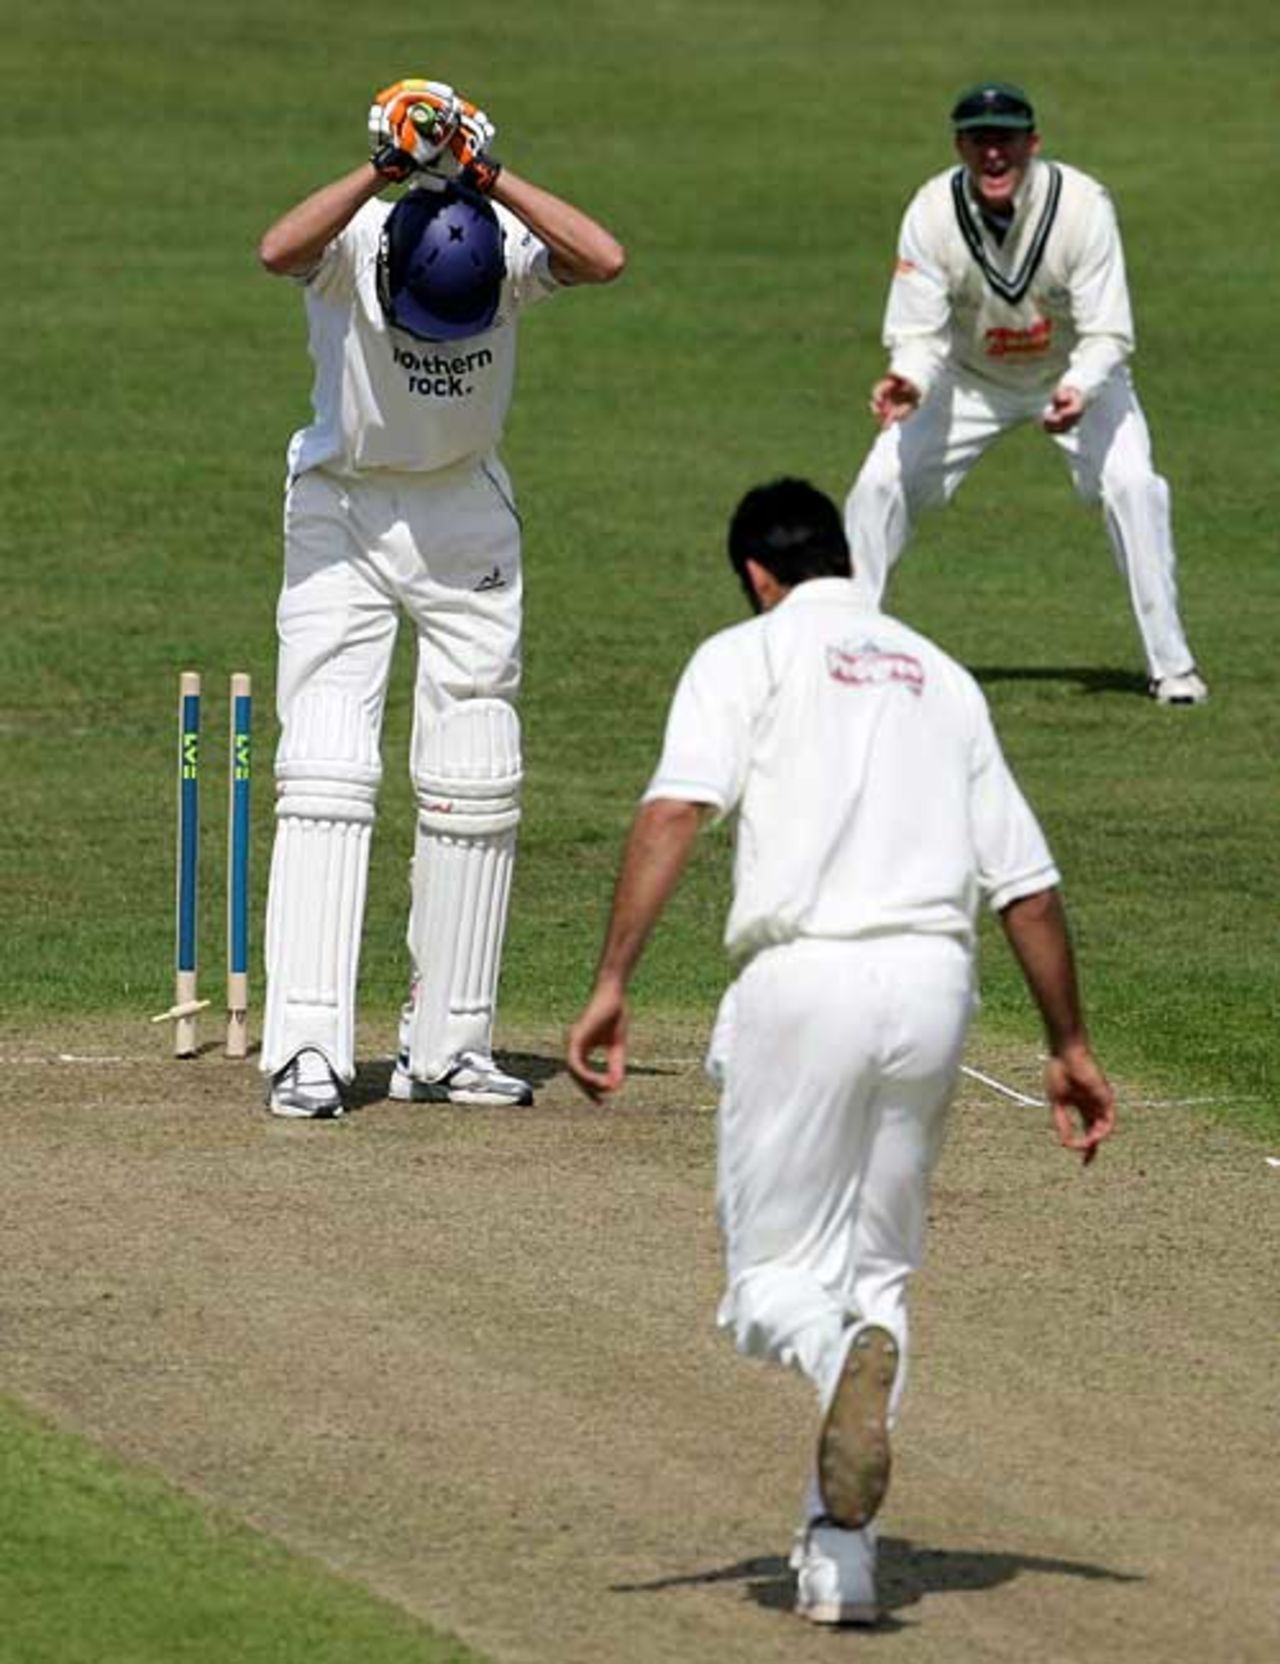 Ben Harmison is bowled by Nadeem Malik, Worcestershire v Durham, County Championship, Division One, New Road, April 18, 2007